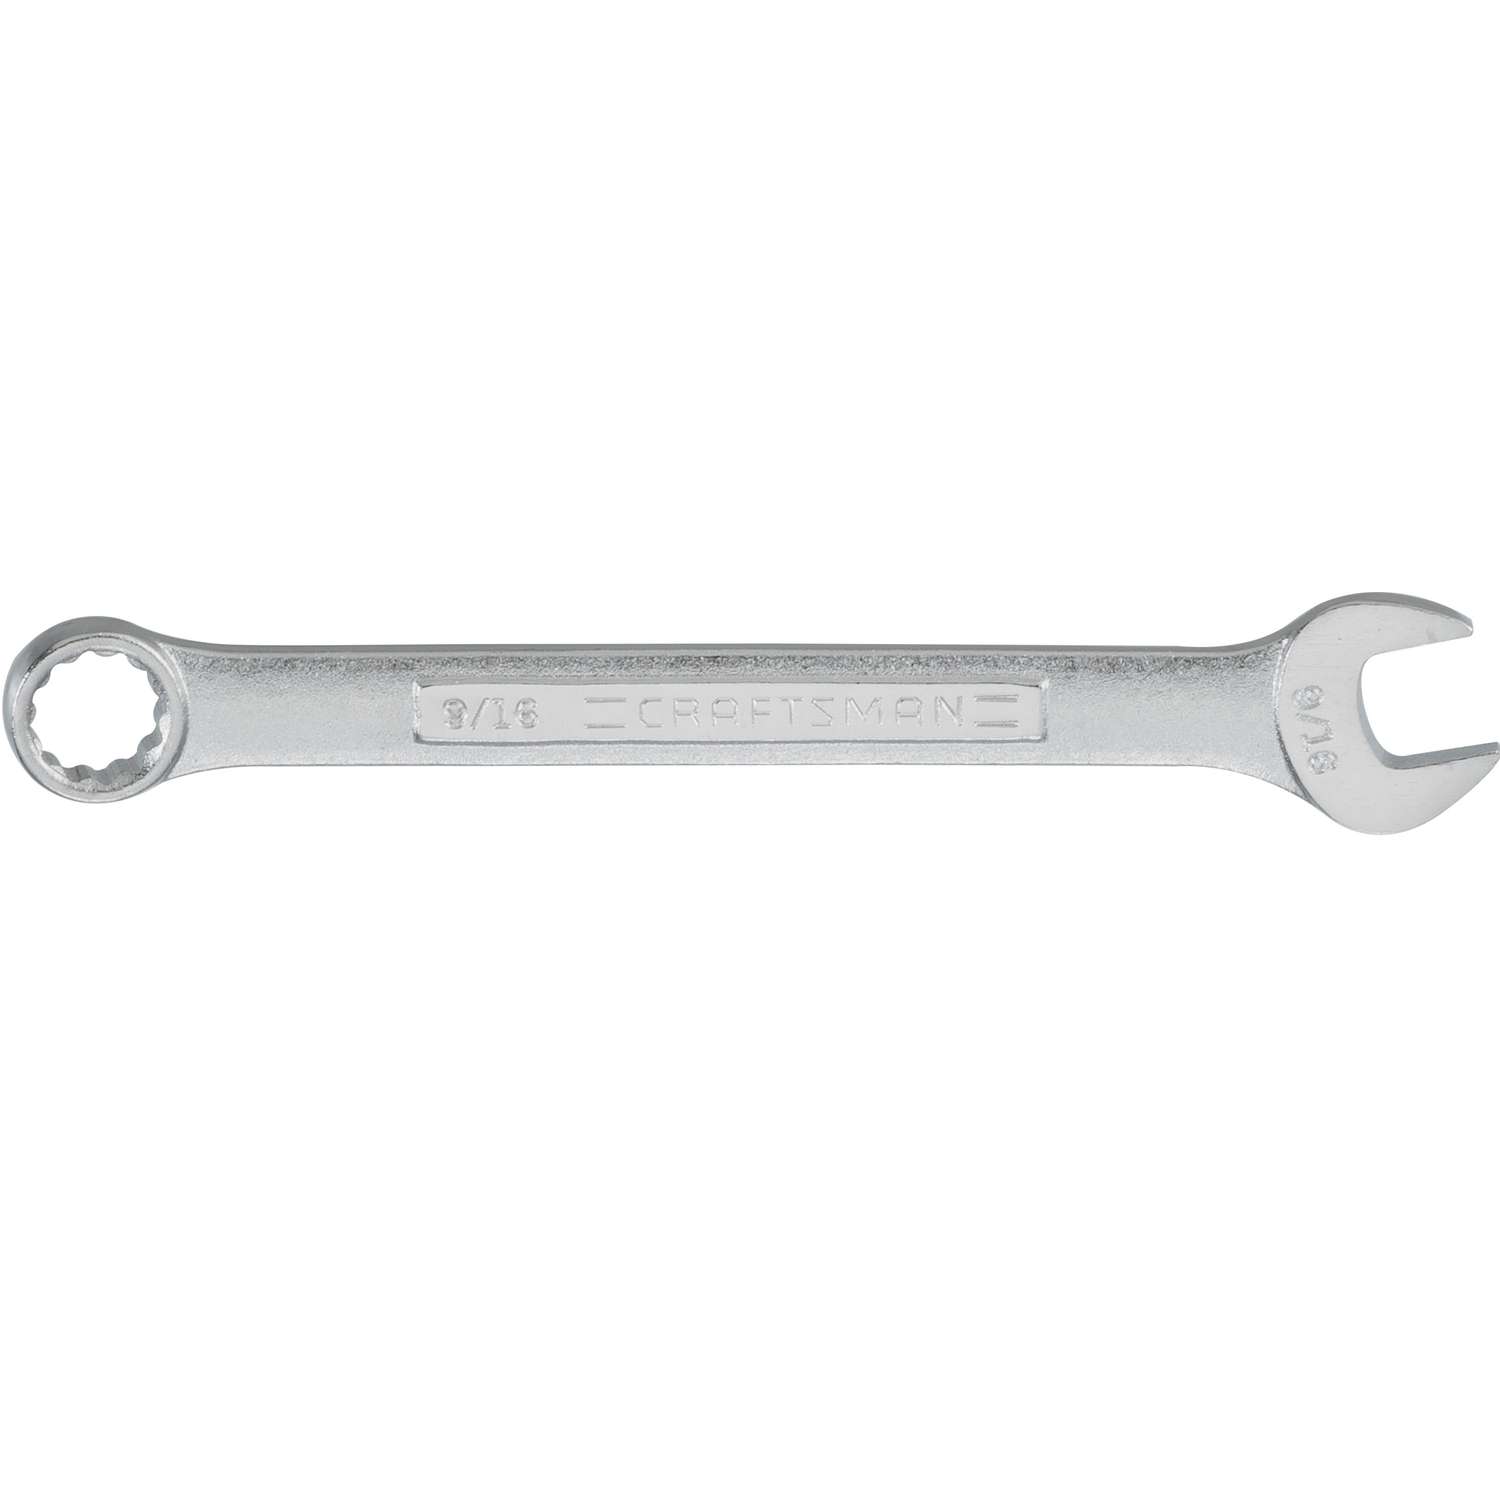 Craftsman 13/16 Universal Combination Wrench 3071